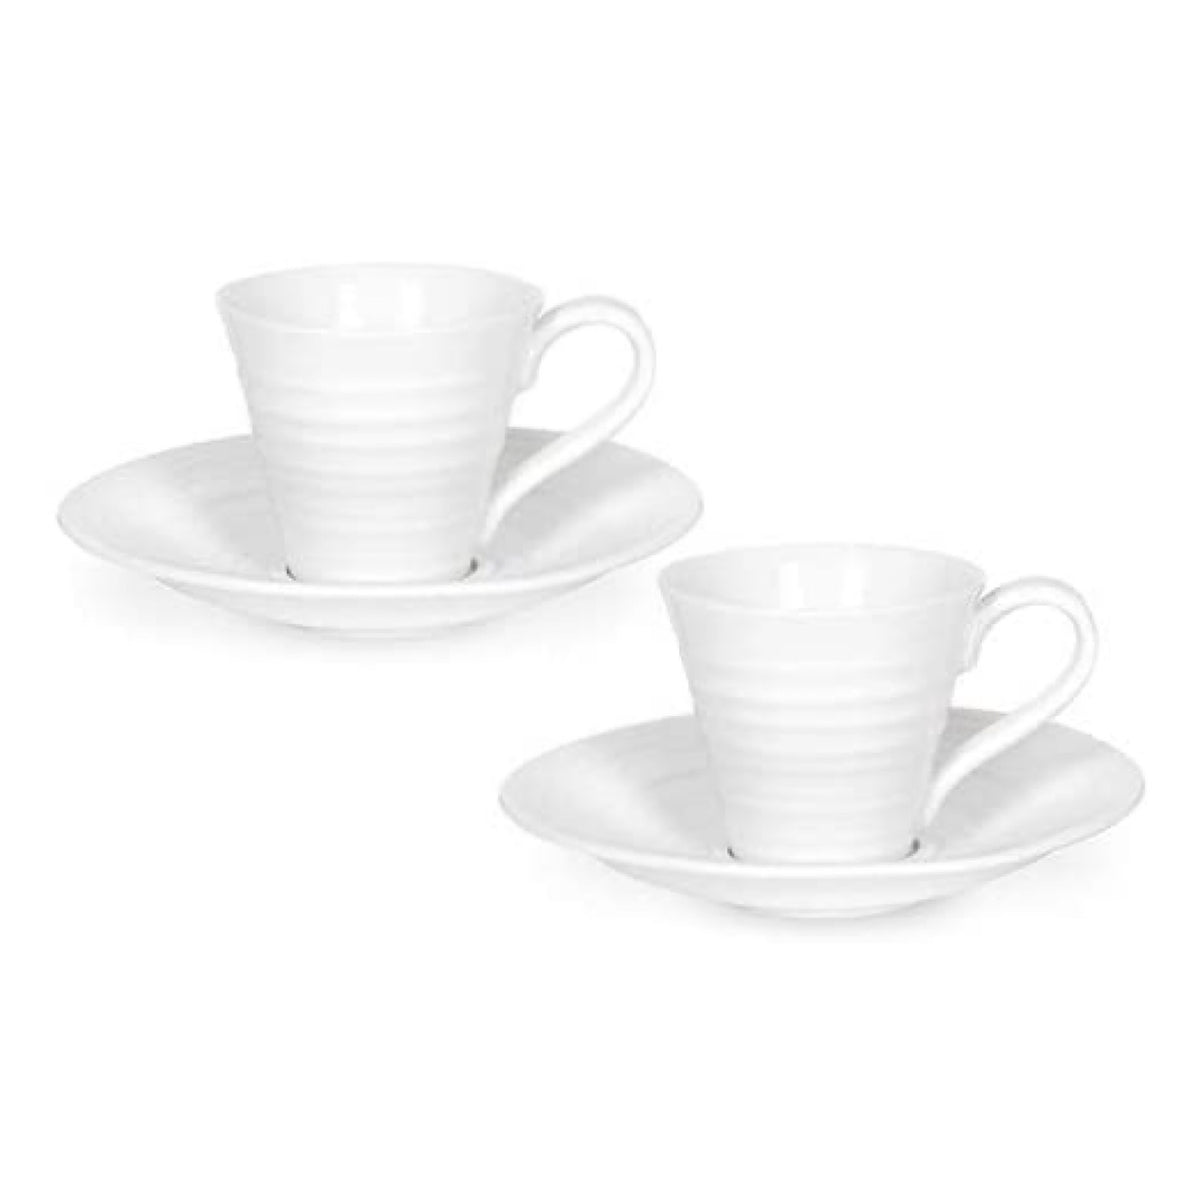 Sophie Conran Espresso Cups with Saucers, Set of 2